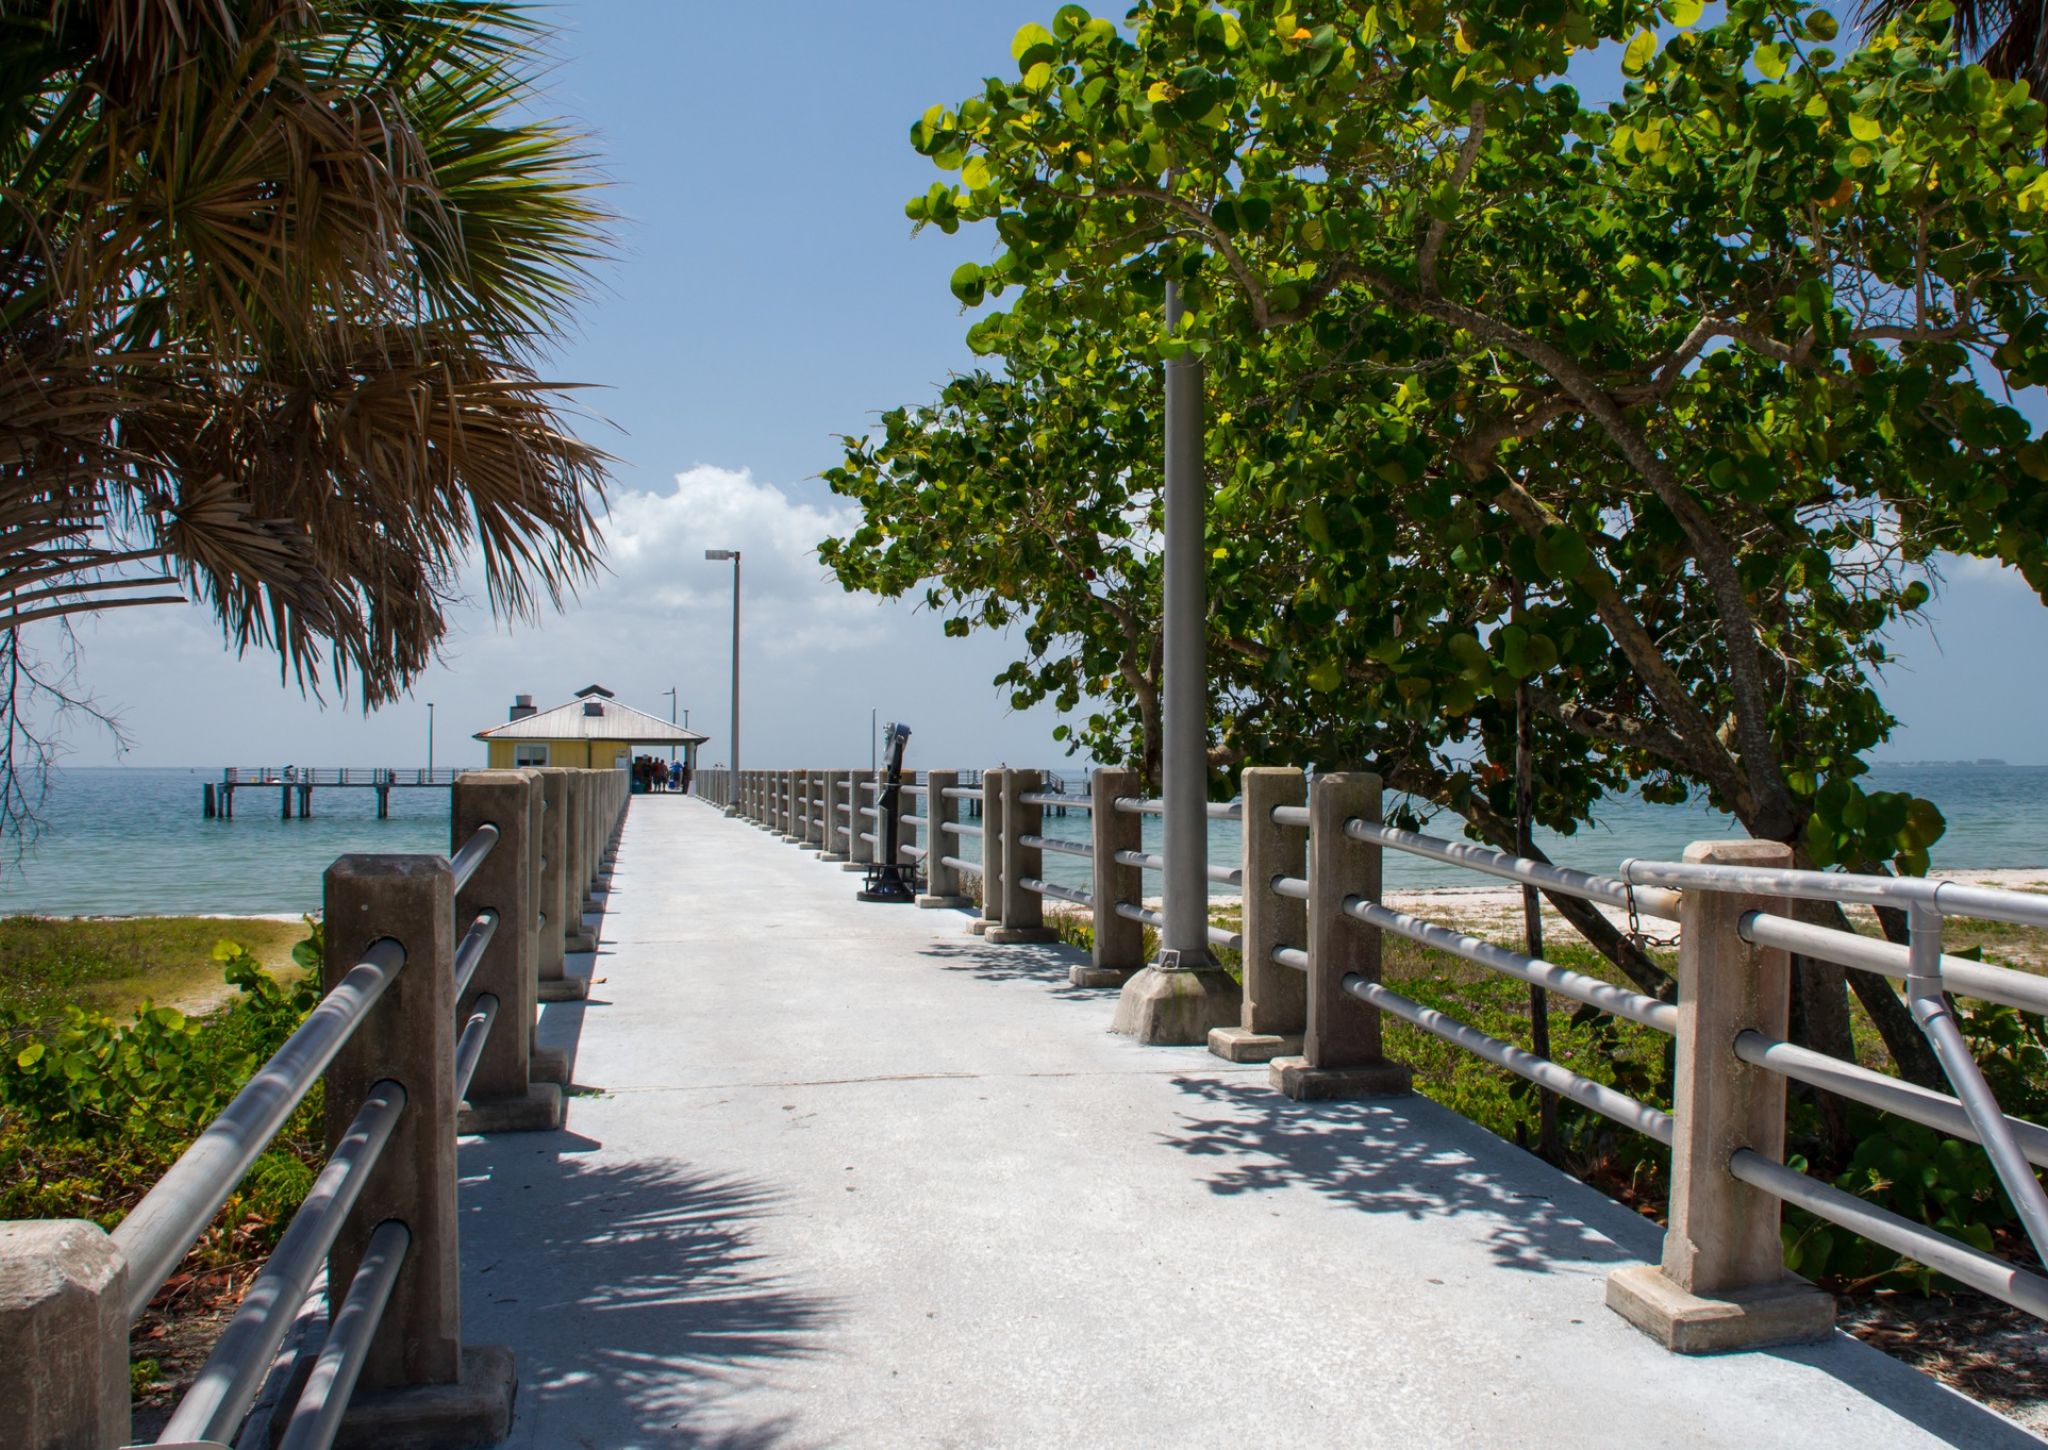 Pier looking to ocean with tropical plants at Fort De Soto State Park